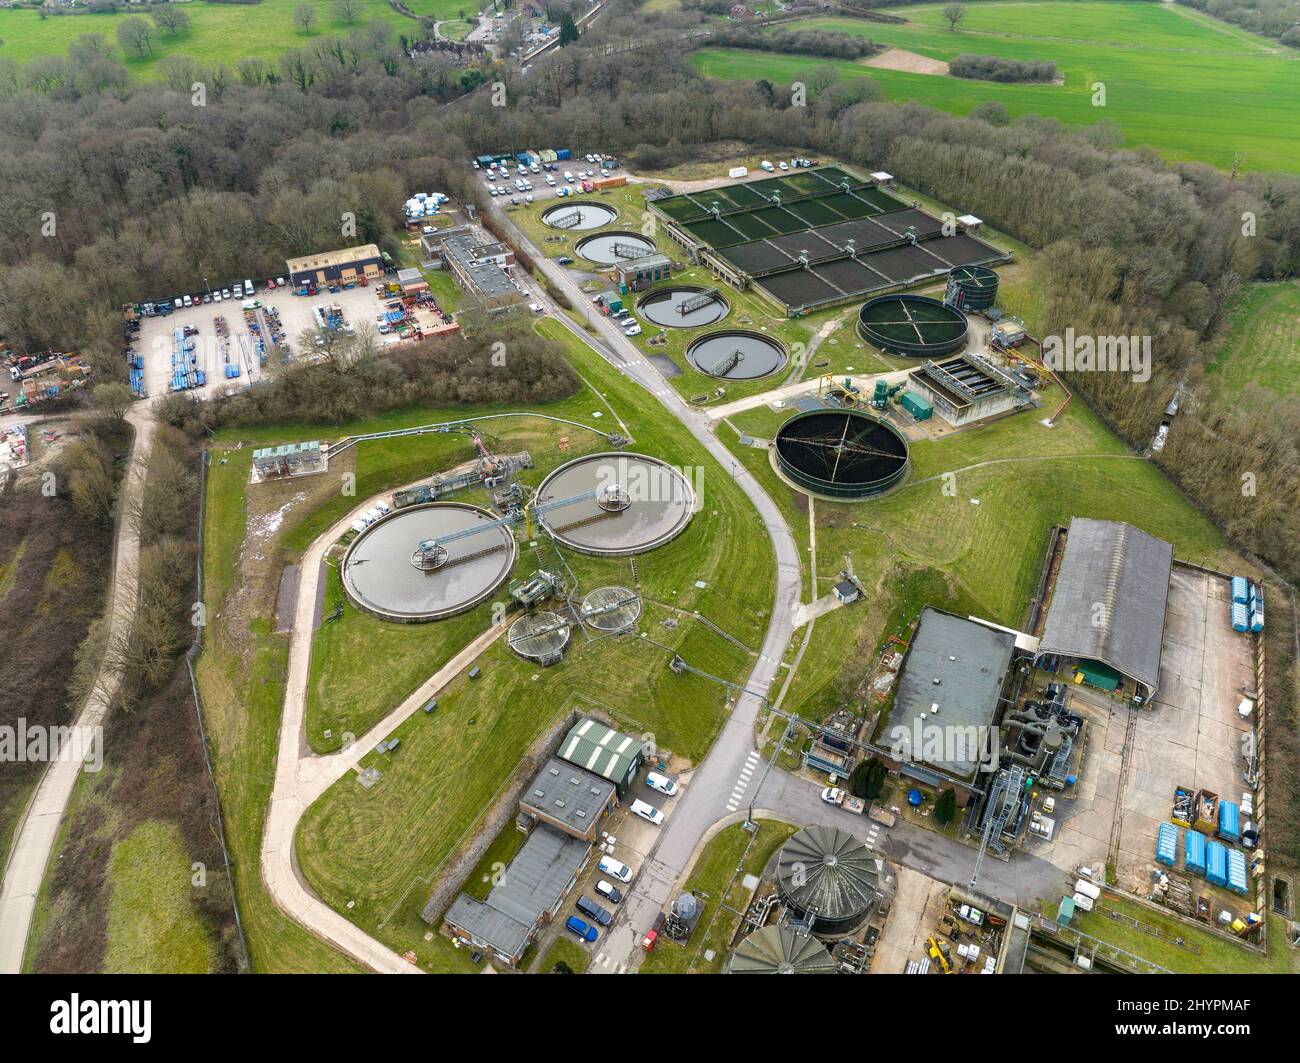 sewage and wastewater treatment facility (Btu Horsham Water Treatment Works) in Horsham West Sussex, UK, with settlement tanks and aeration lanes. Stock Photo